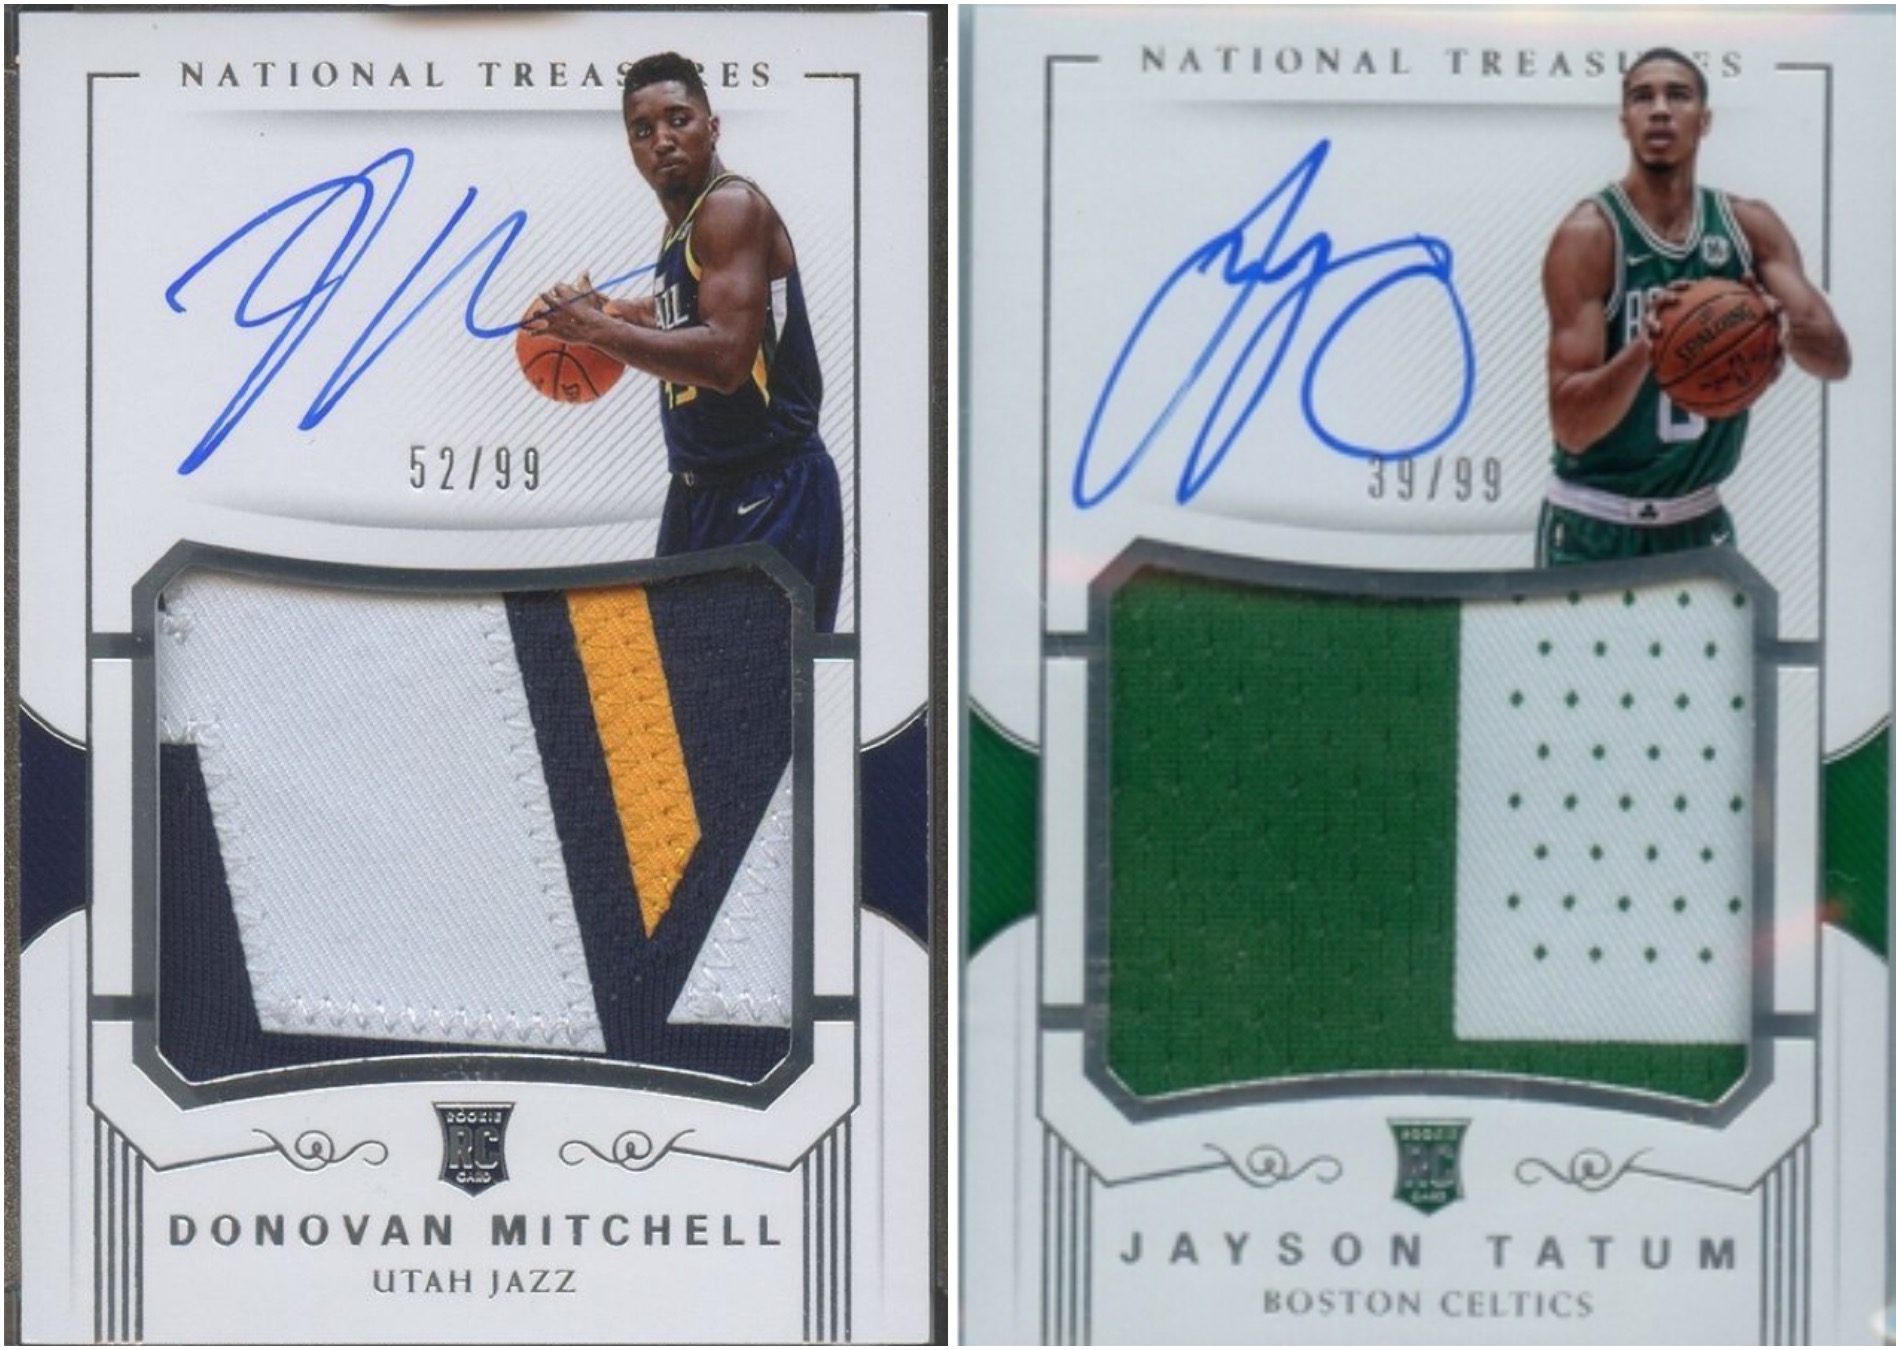 Images of sports trading cards for Donovan Mitchell and Jayson Tatum